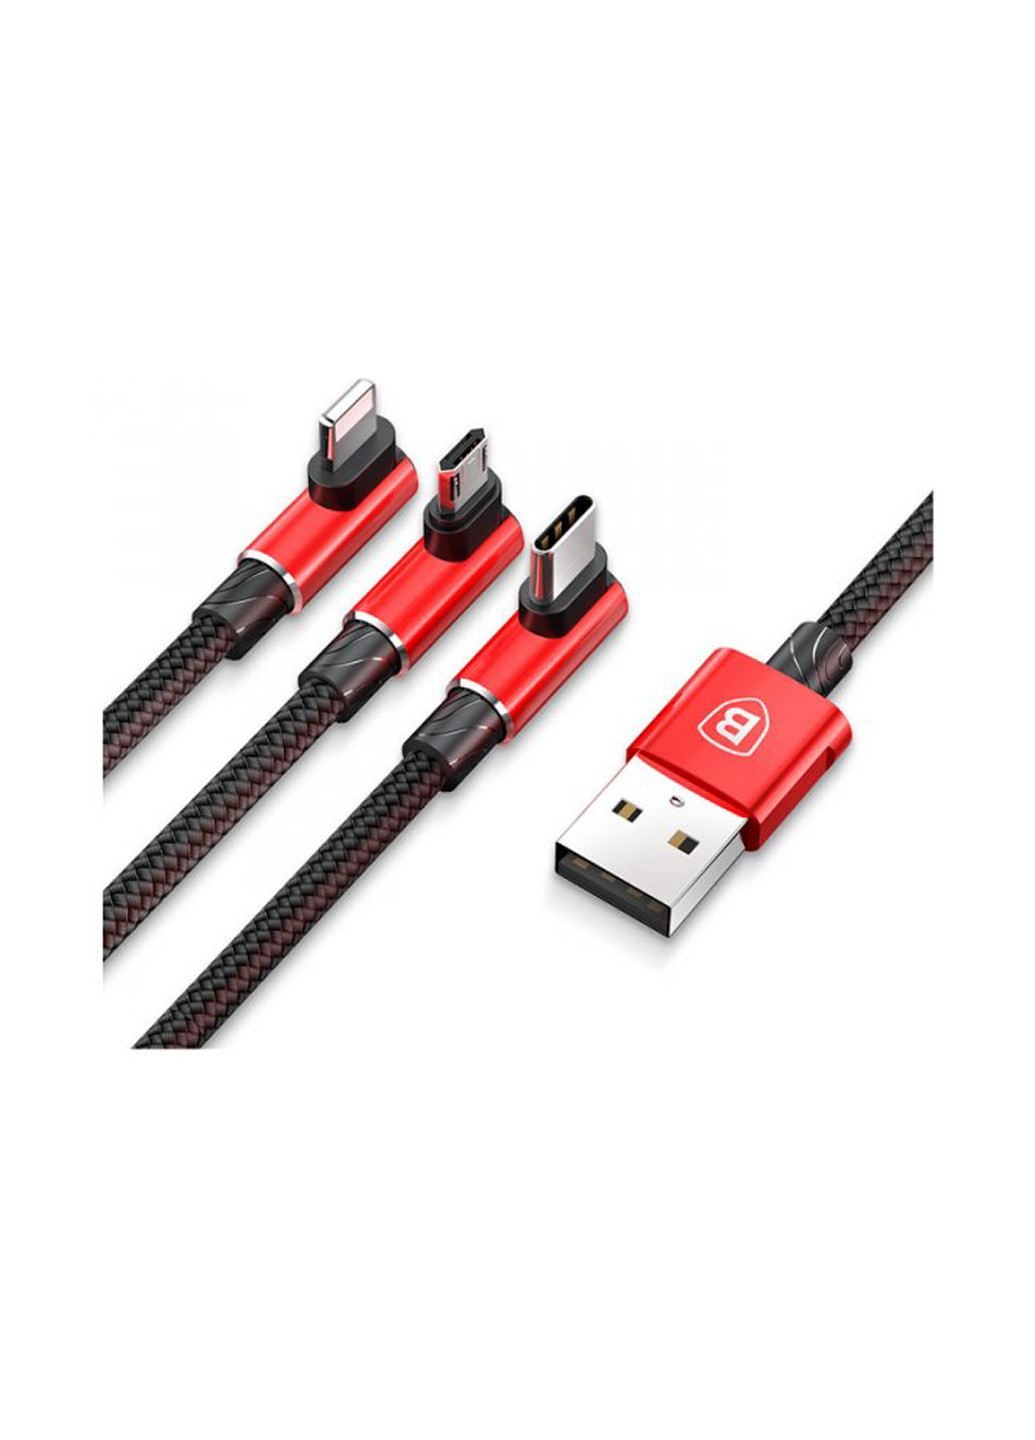 Кабель 3.5A 1.2M Red (CAMLT-WZ09) Baseus mvp 3 in 1 mobile game cable usb for m+l+t (135000184)